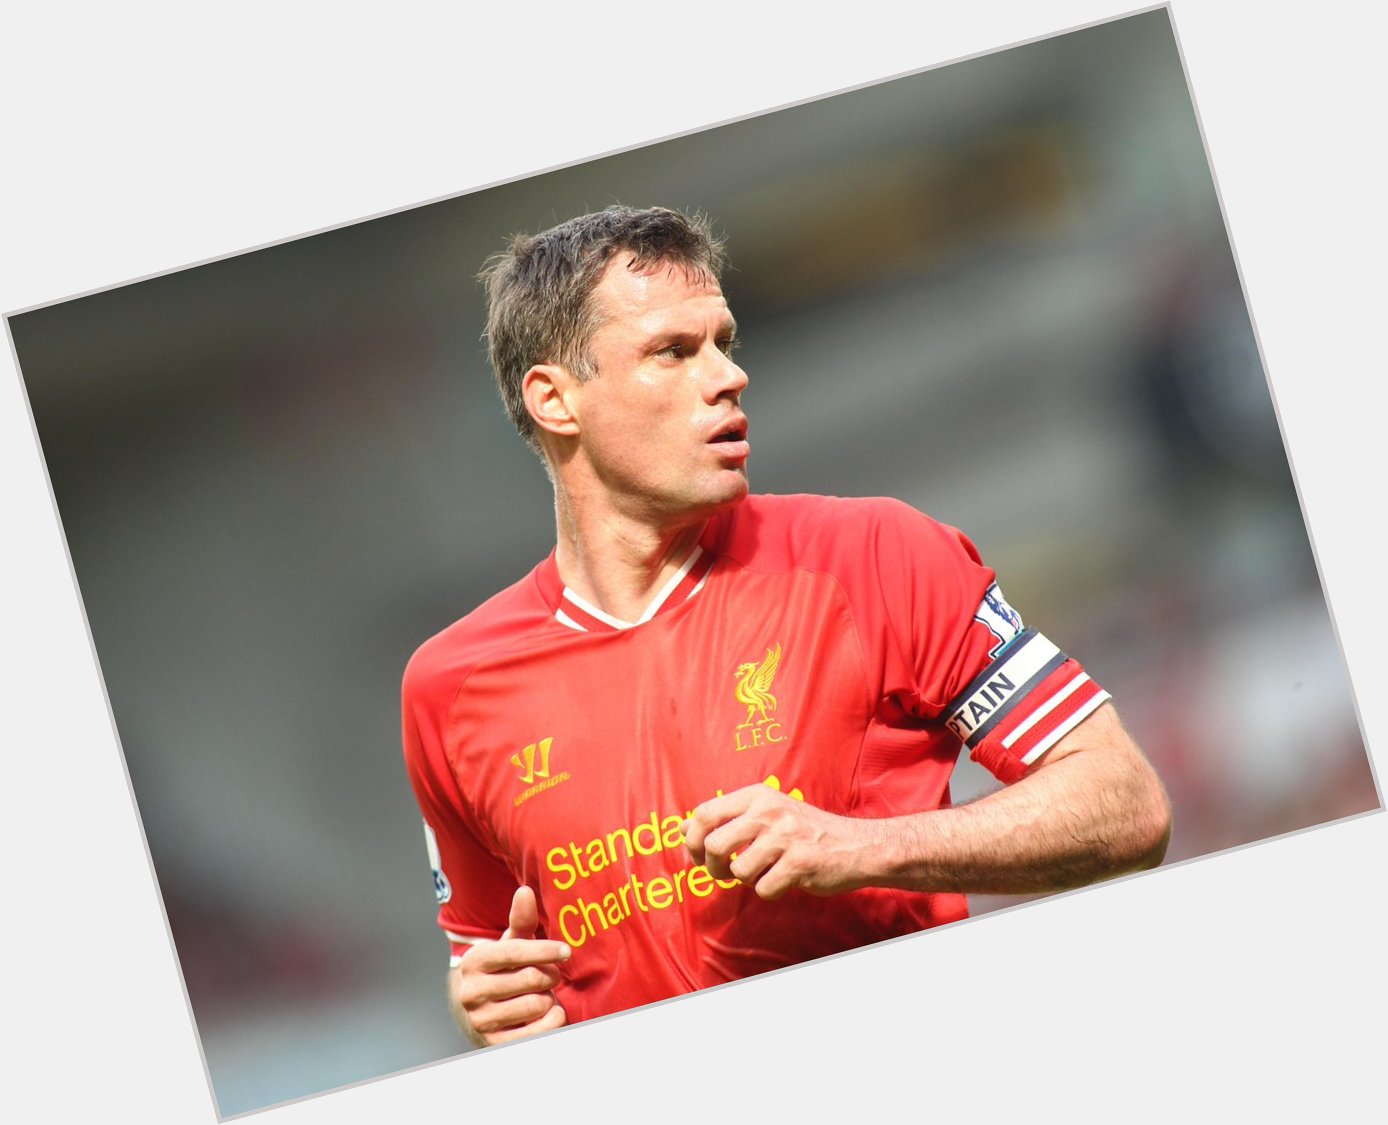 Happy 37th birthday to Jamie Carragher. He won 2 FA Cups, 1 UEFA Cup & 1 Champions League at Liverpool. Club legend. 